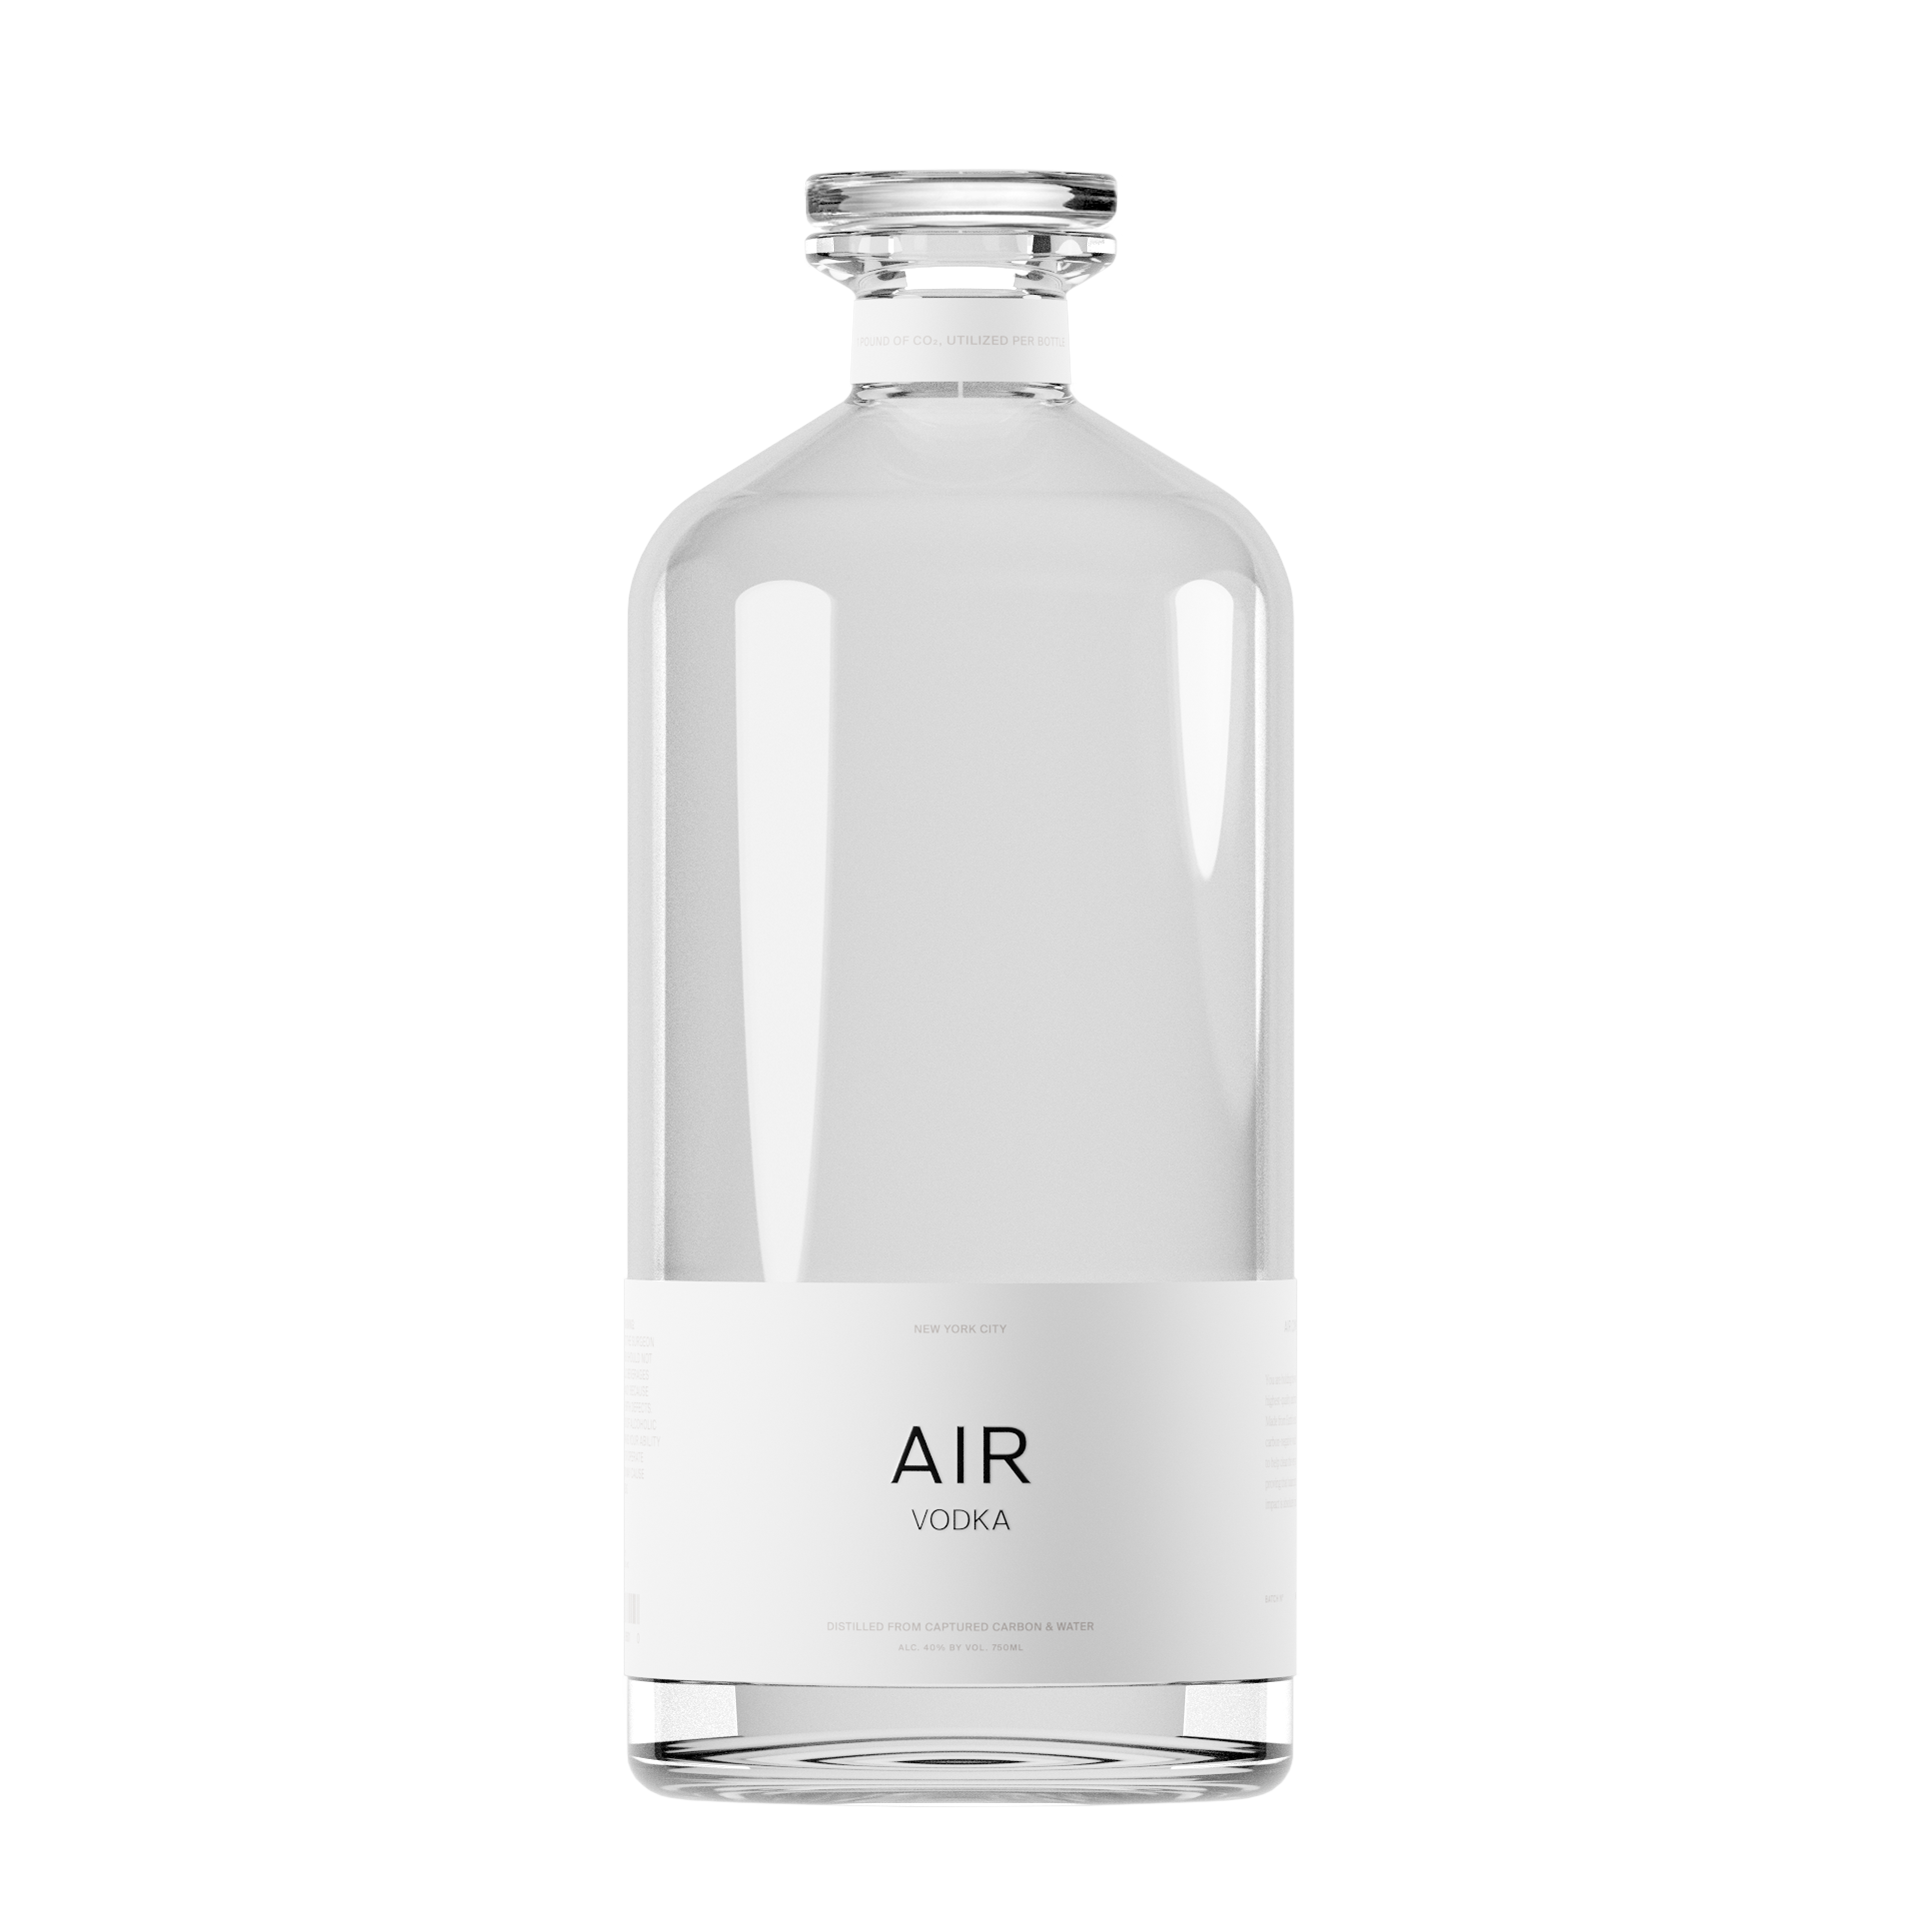 AIR Vodka: Carbon Negative and Impurity-Free Vodka Made from CO2